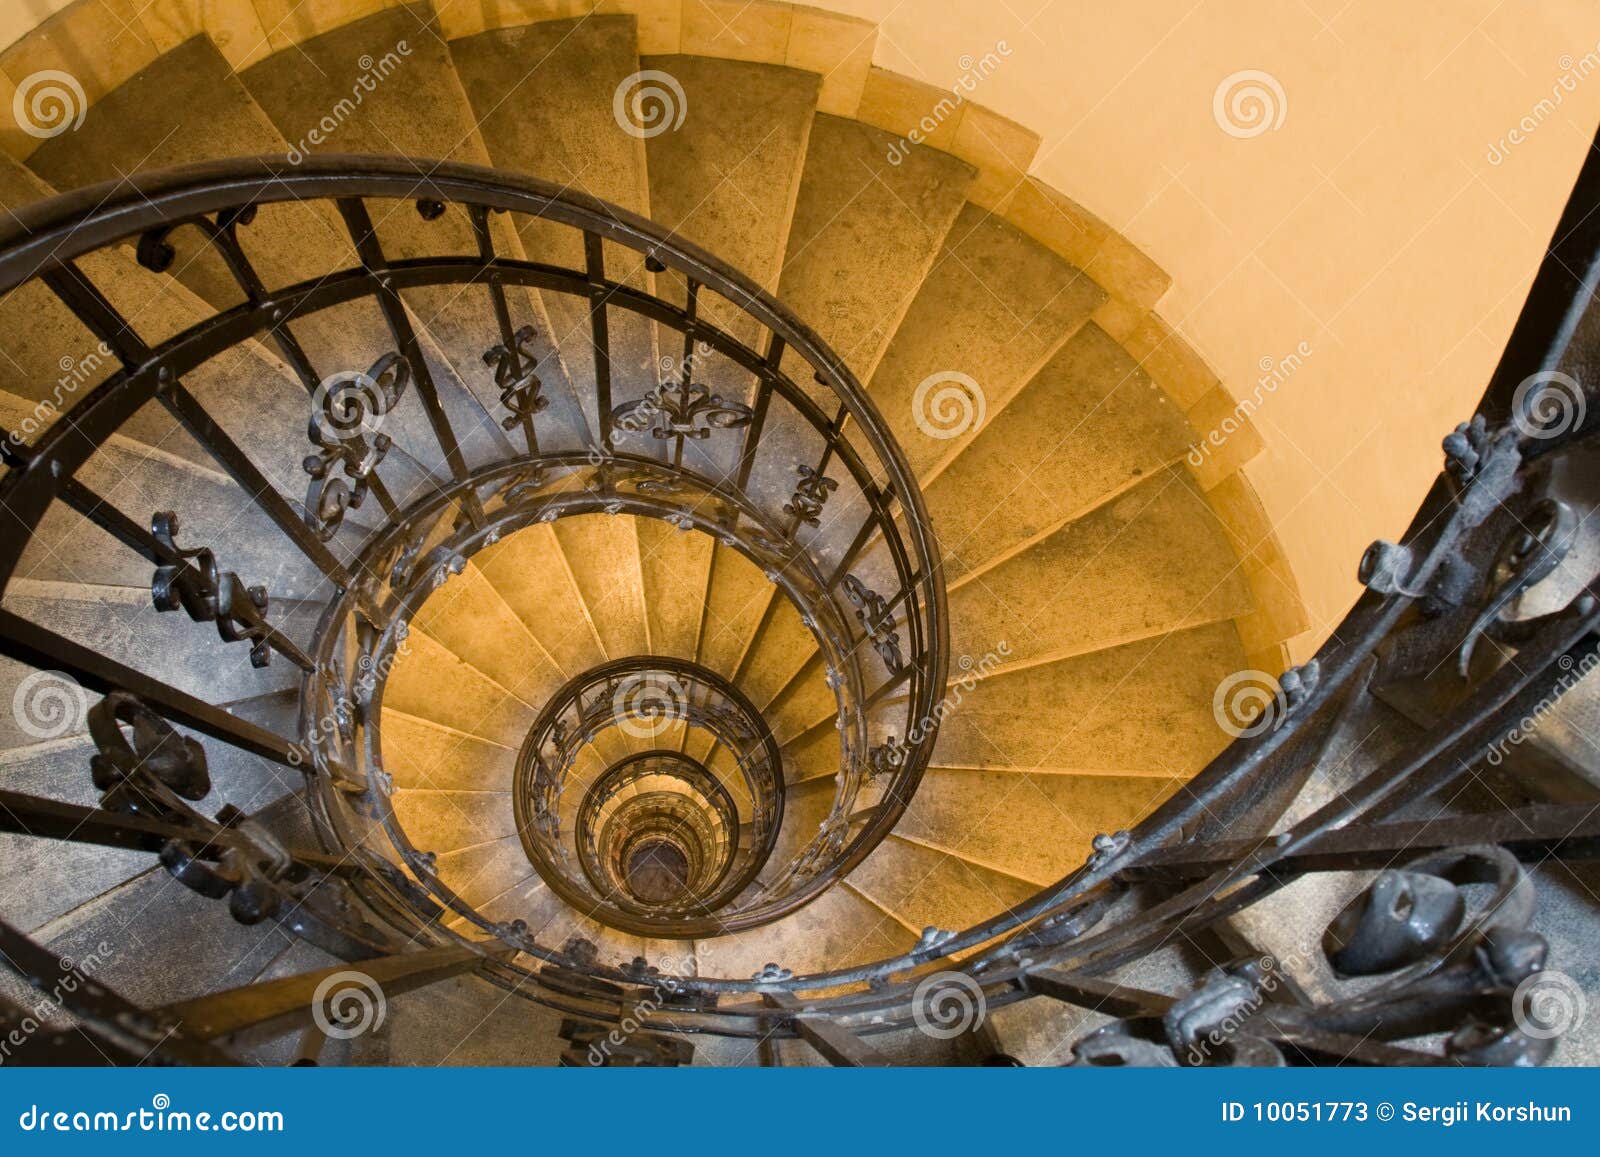 spiral staircase and stone steps in old tower